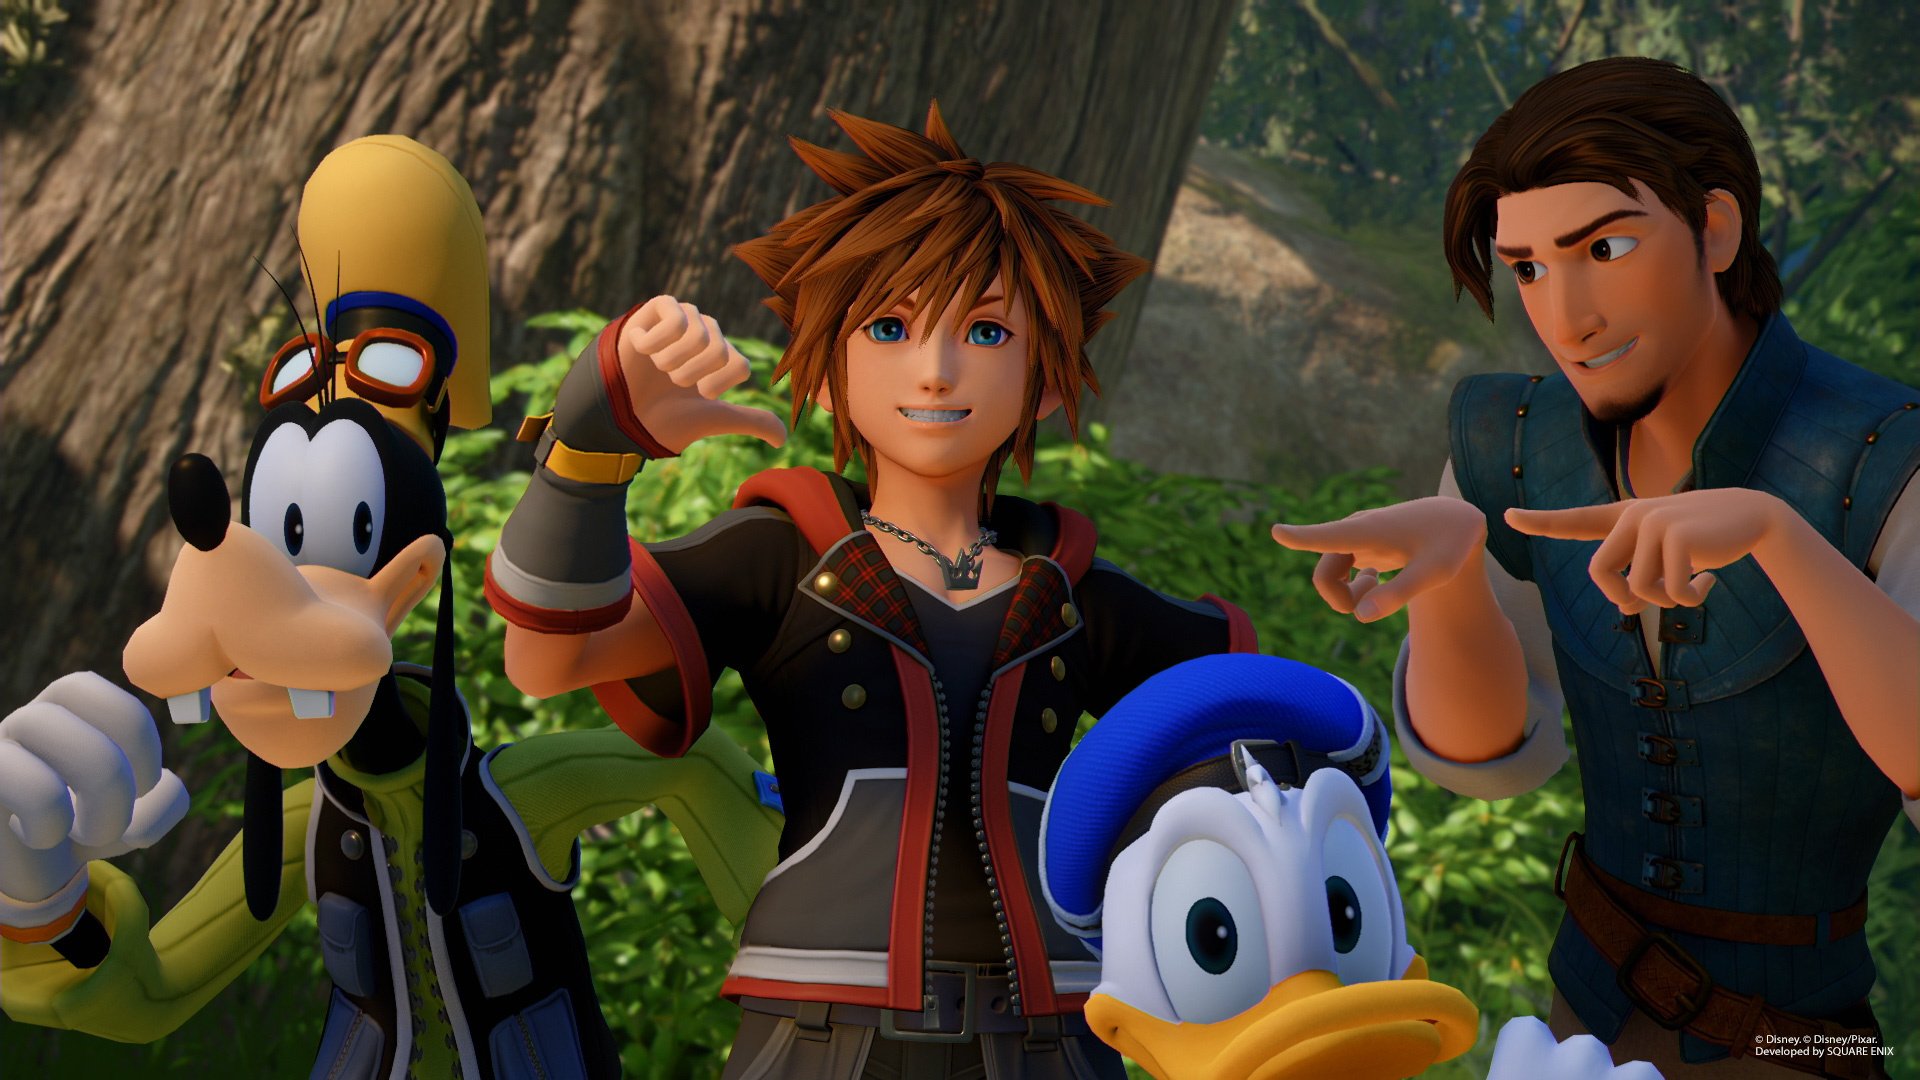 Kingdom Hearts III Details Upcoming Free and Paid DLC, Includes Extra Scenarios